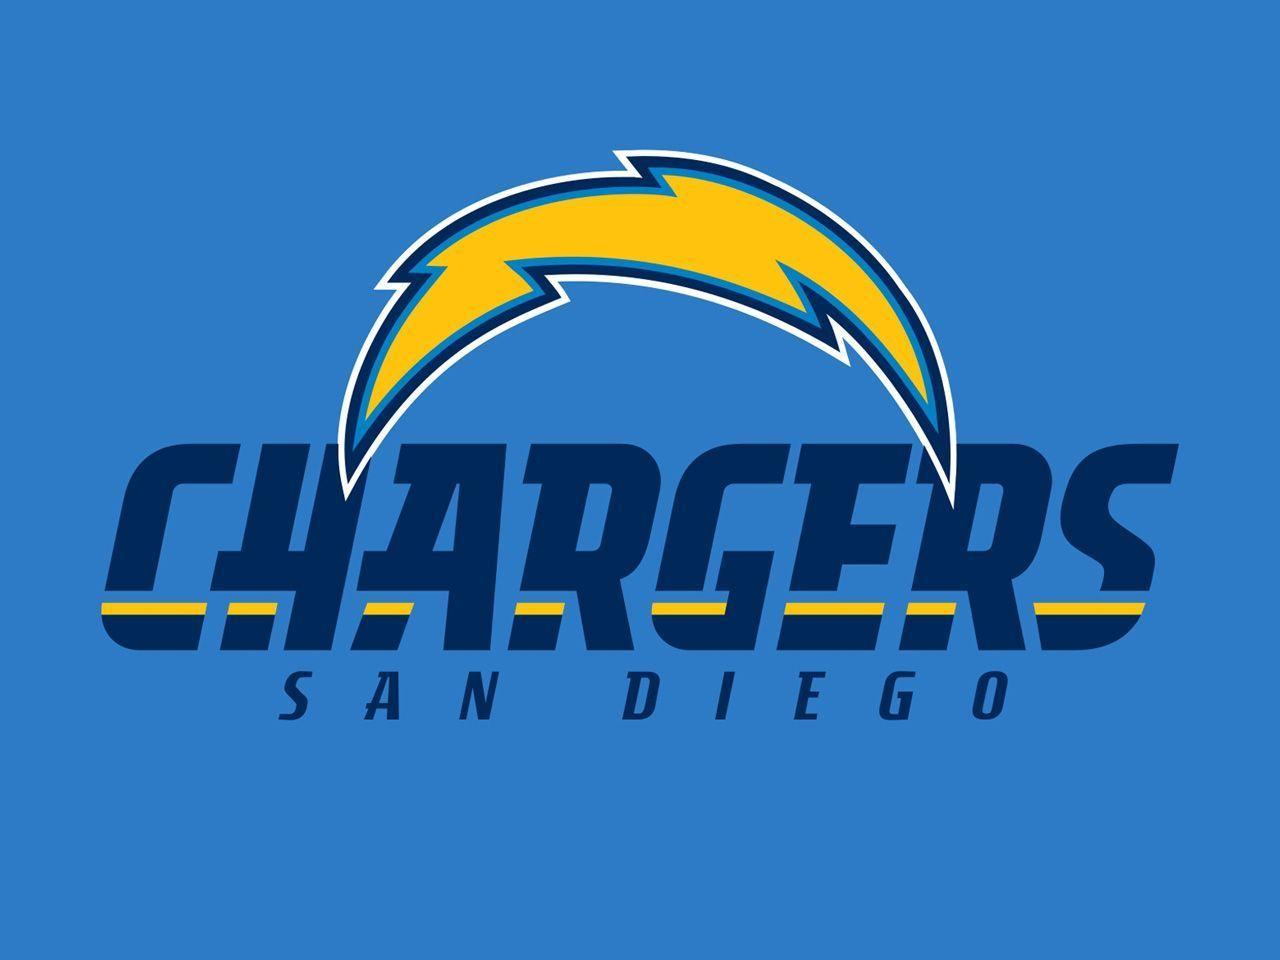 San Diego Chargers Wallpaper Free